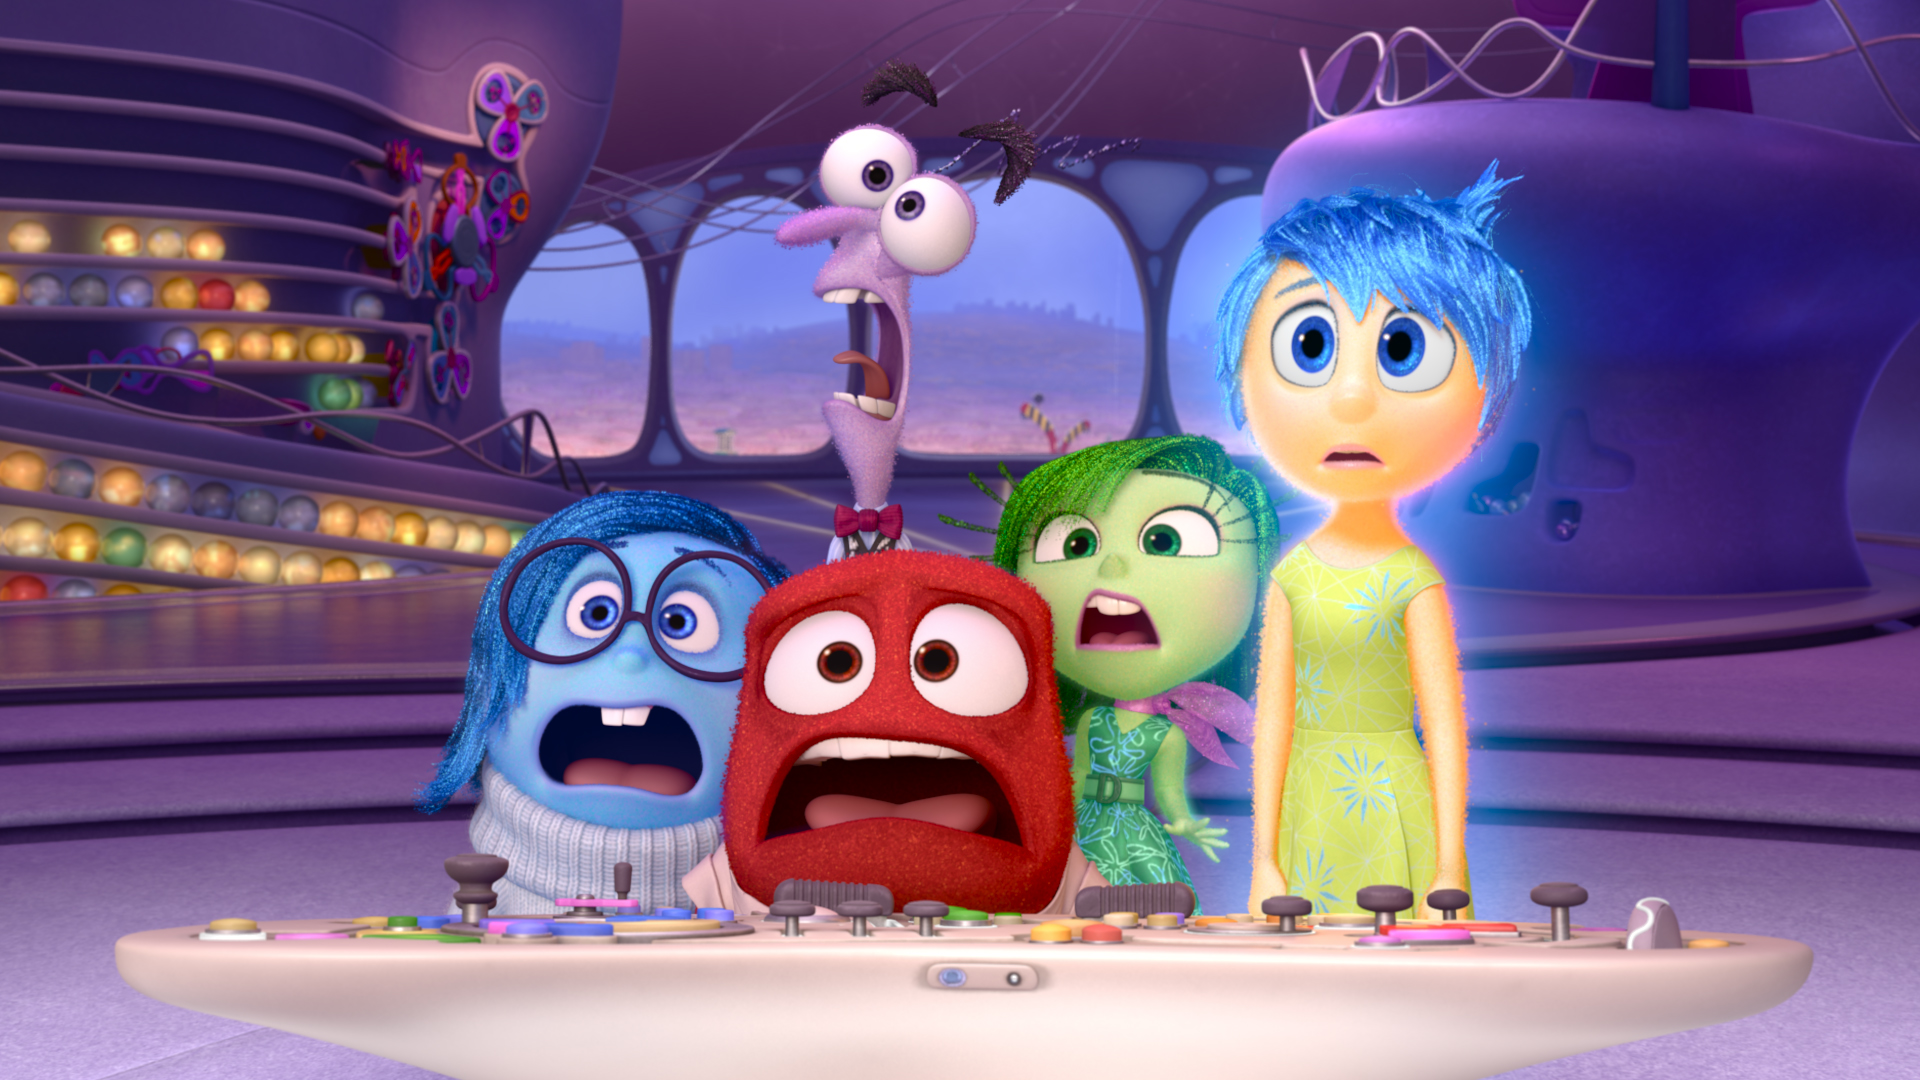 Pictured (L-R): Sadness, Fear, Anger, Disgust, Joy. 2015 Disney Pixar. All Rights Reserved.